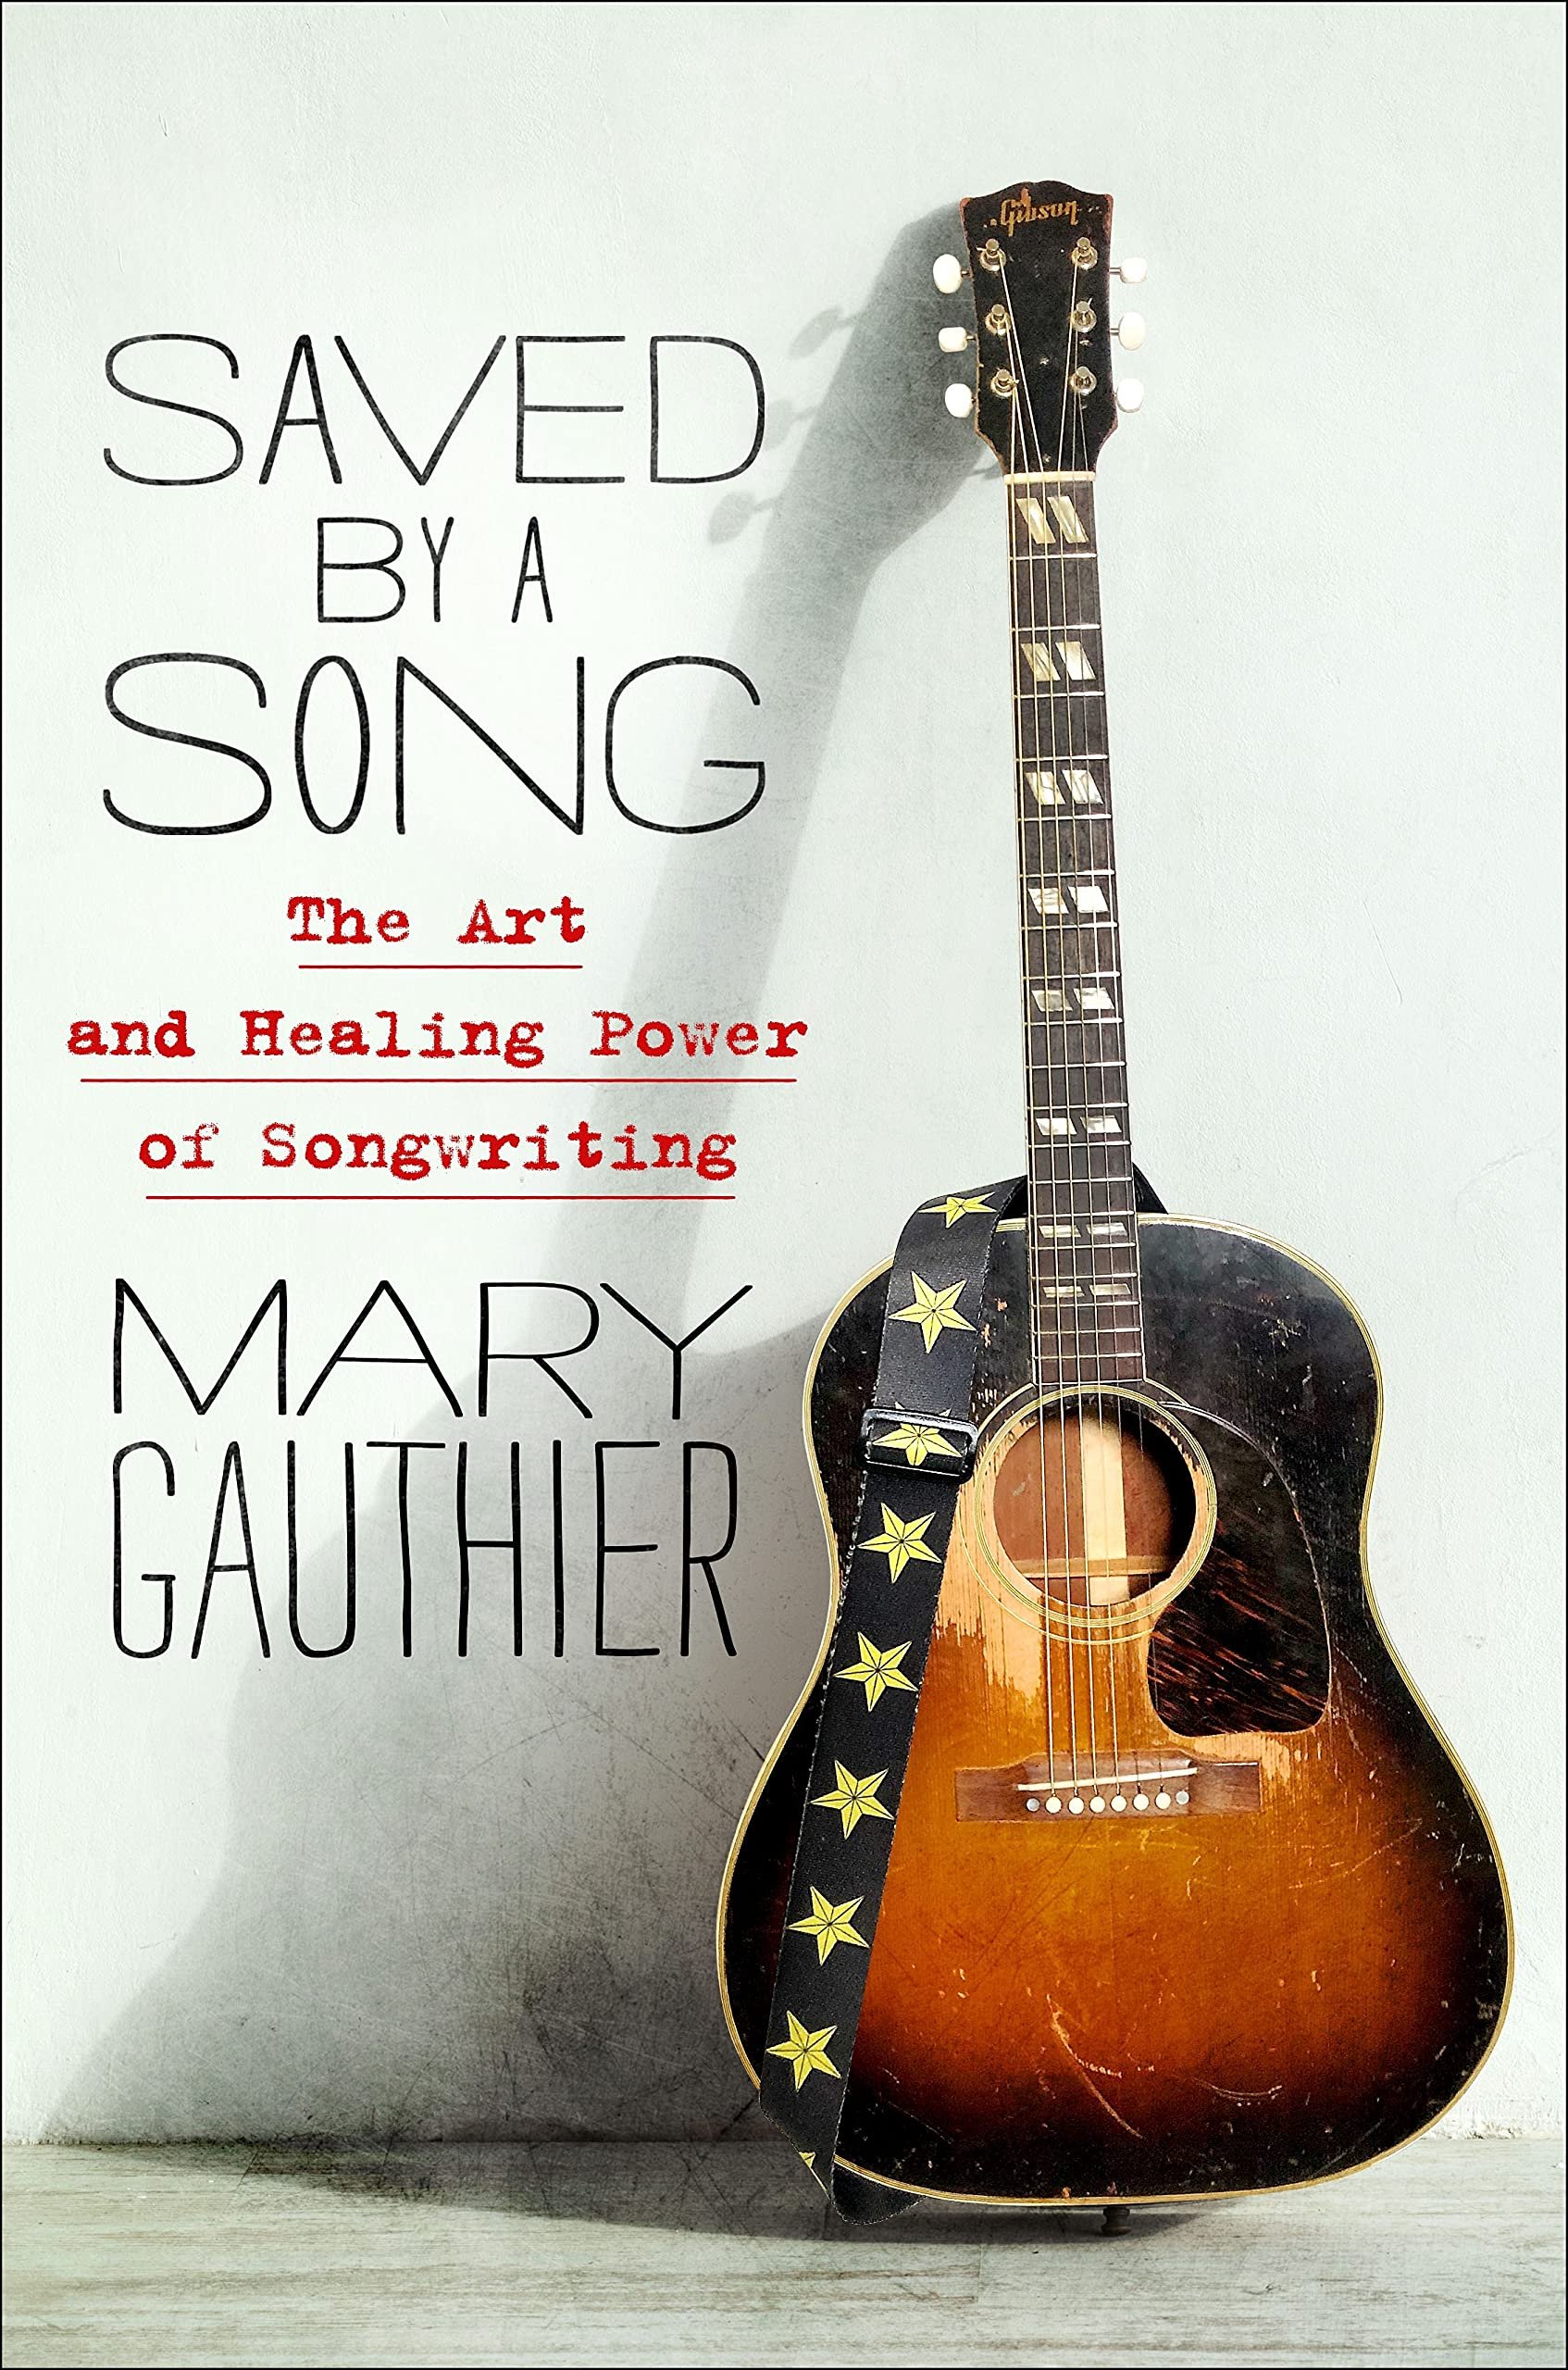 An inspiring exploration of creativity and the redemptive power of song from the Grammy-nominated folk singer and songwriter.